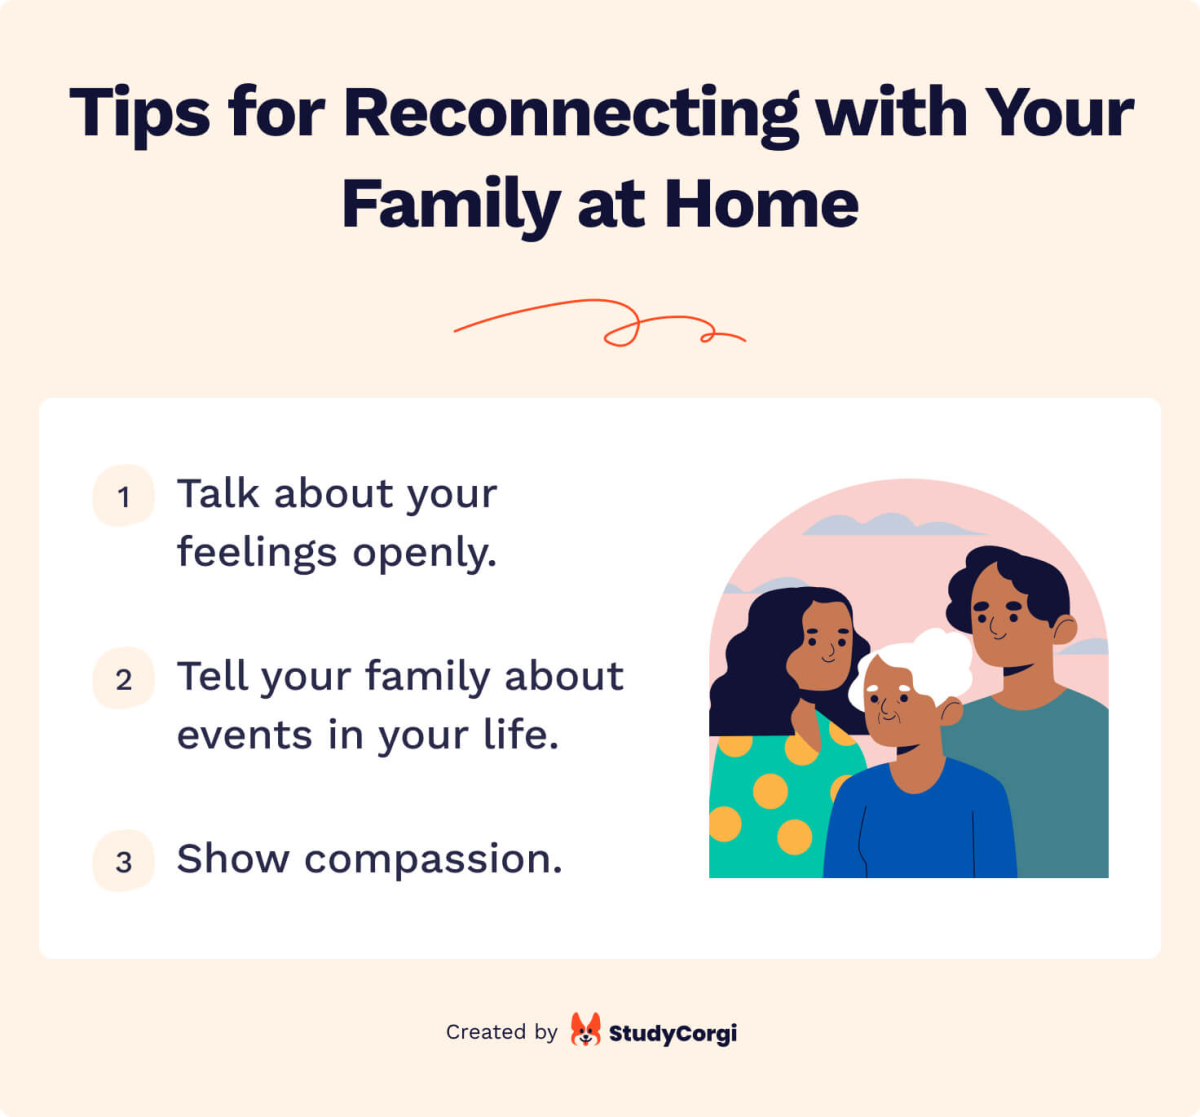 The picture provides tips for reconnecting with your family at home.